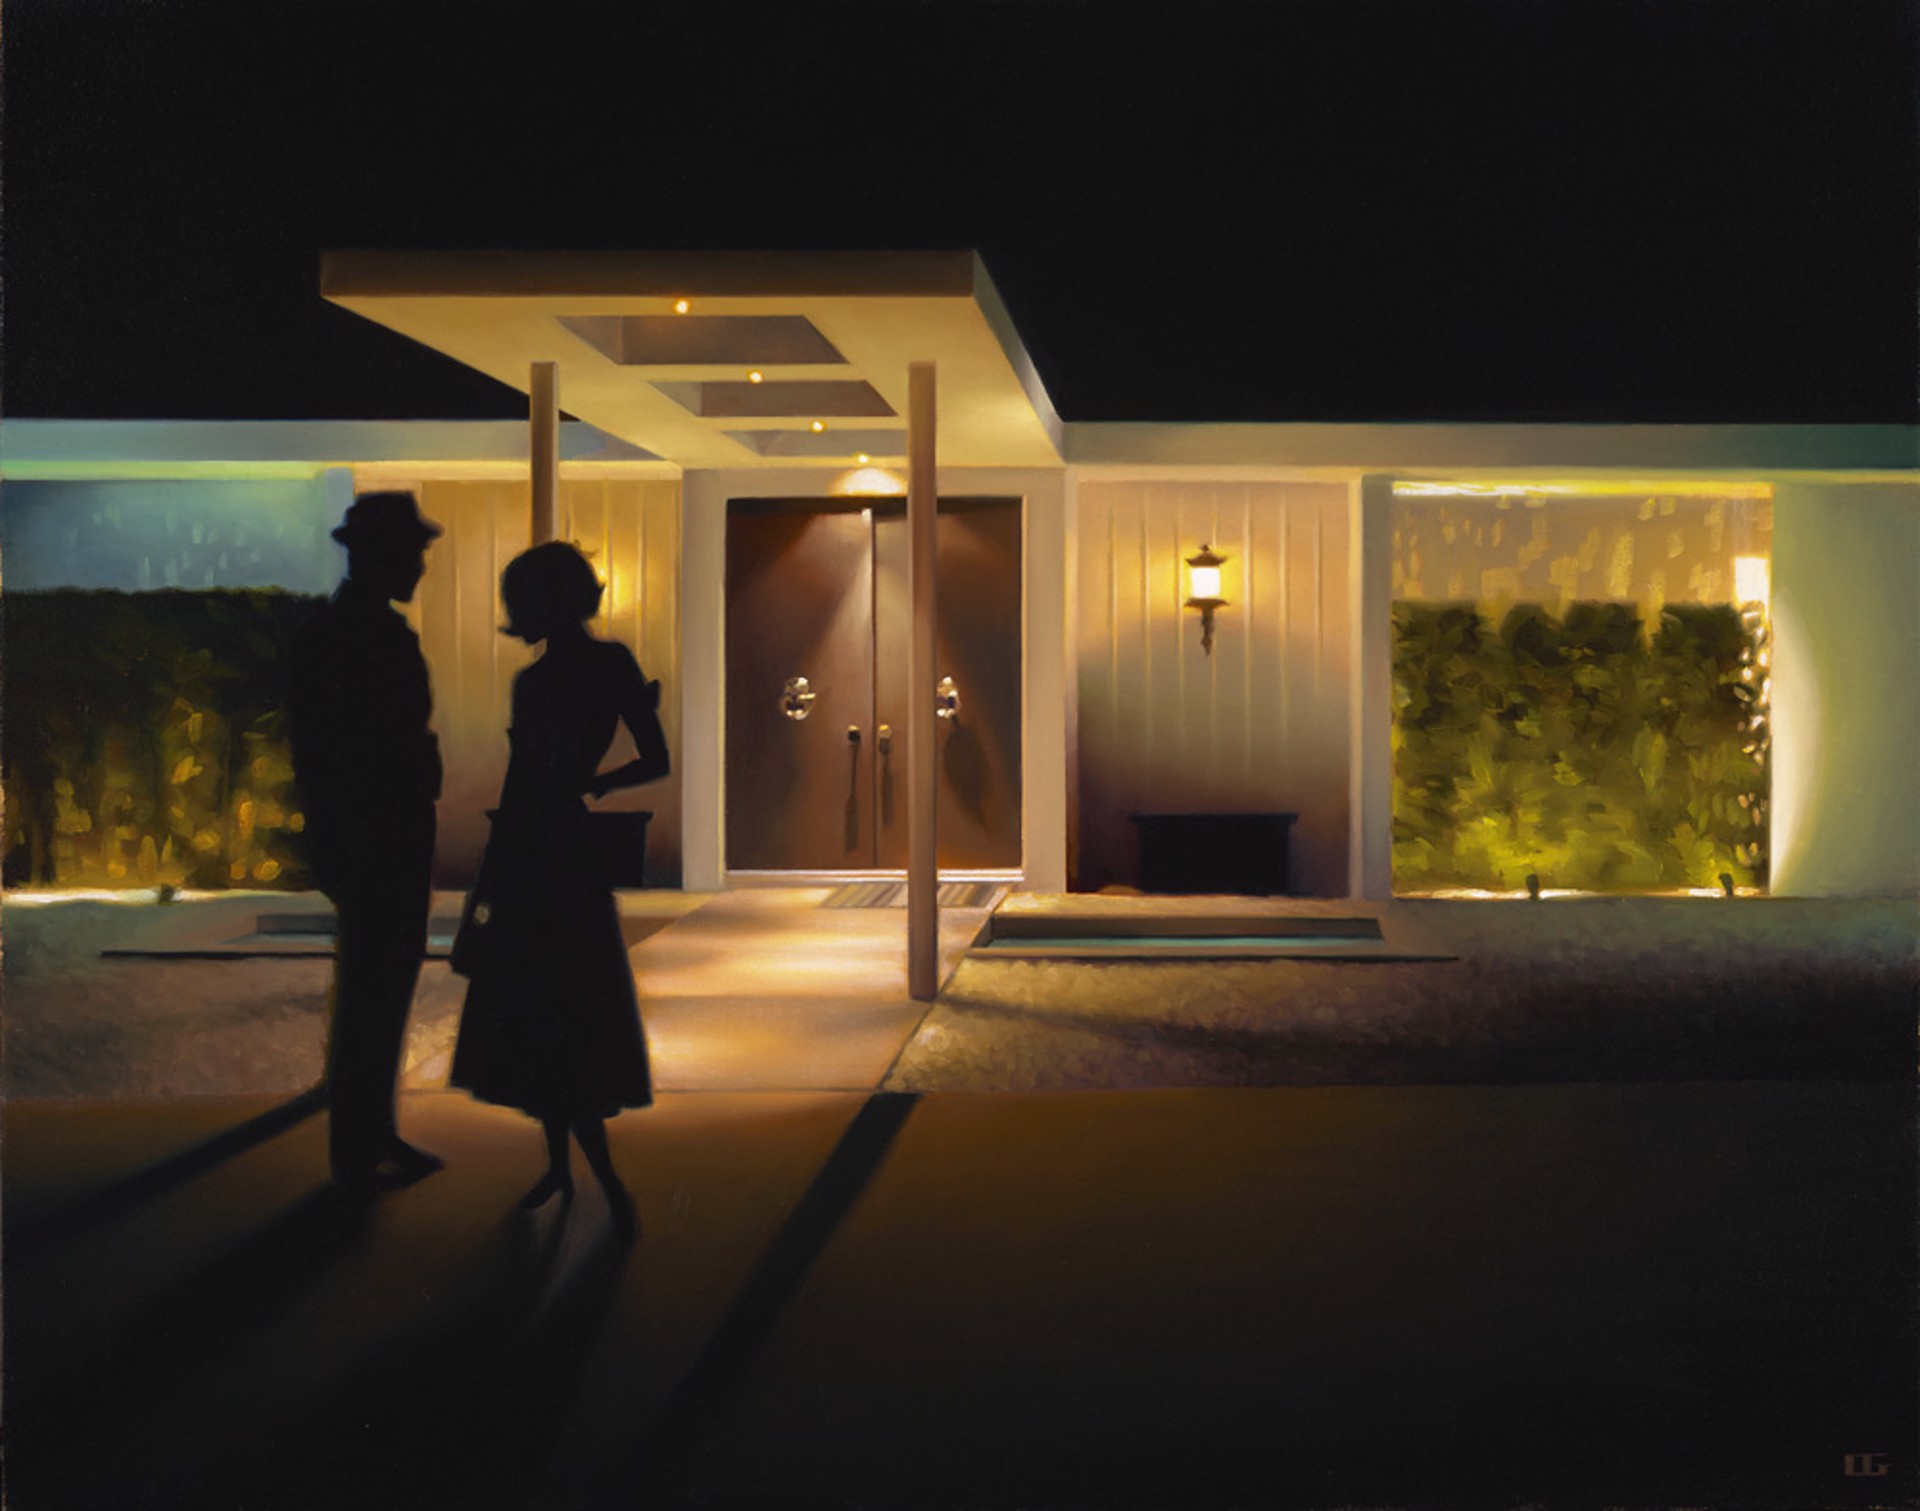 Night Cap (Swan House) by Carrie Graber